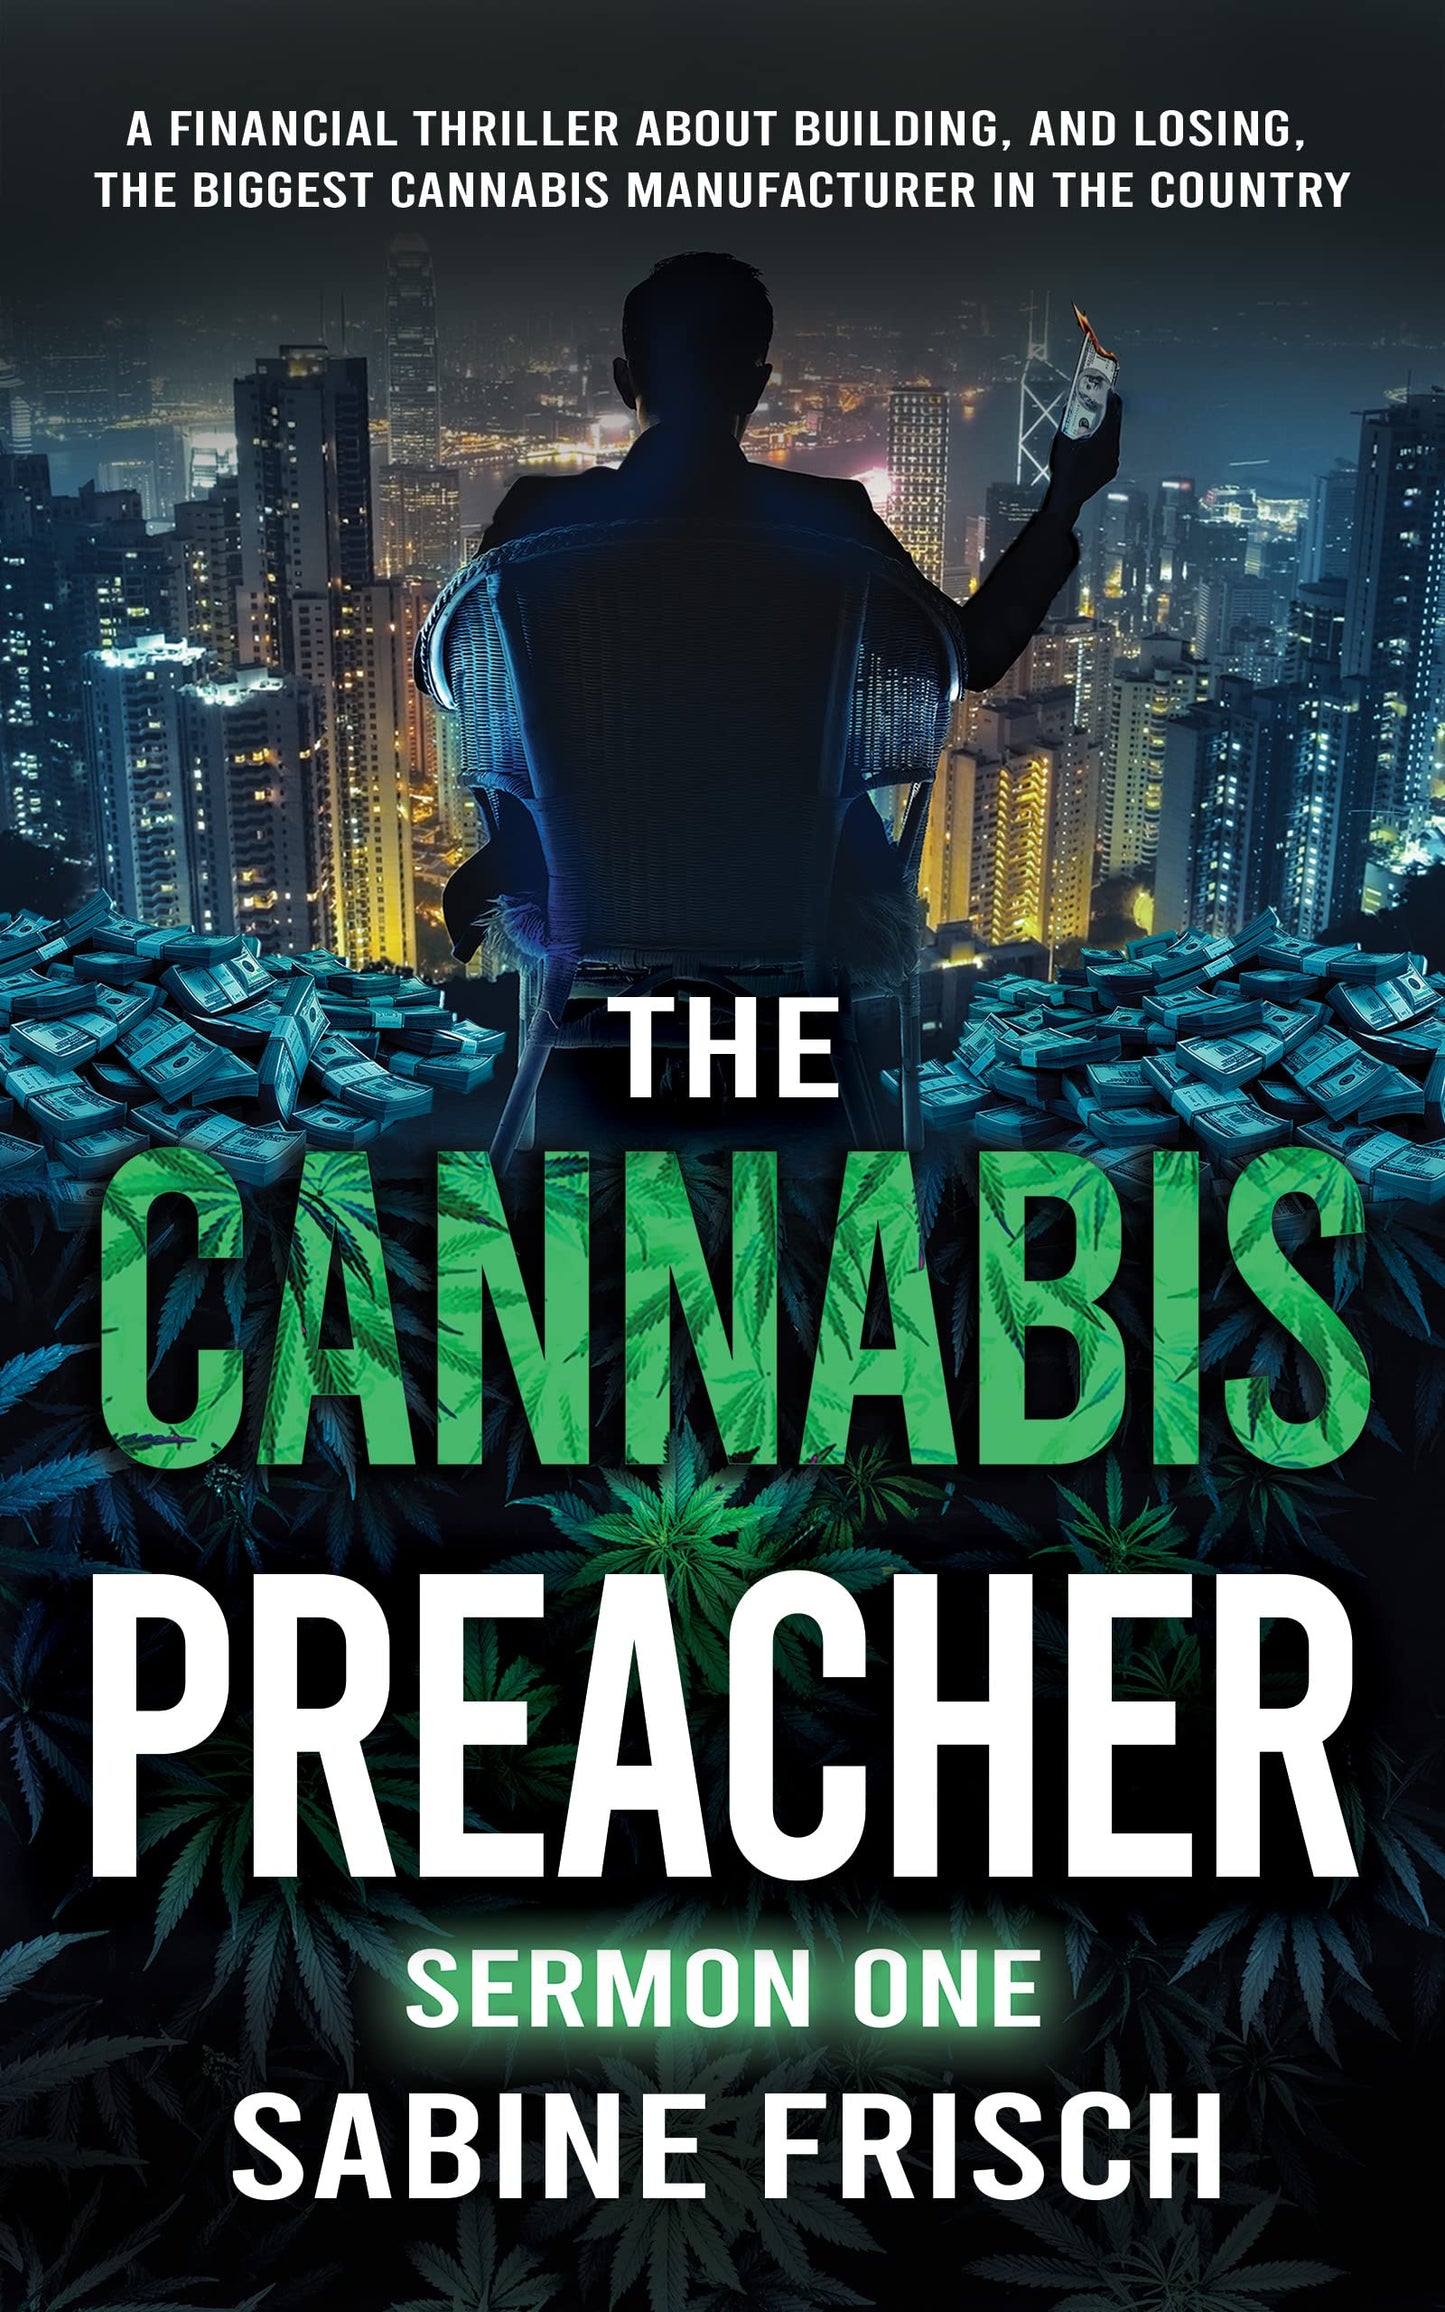 The Cannabis Preacher: Sermon One: A financial thriller about building and losing the biggest Cannabis Operation in the country